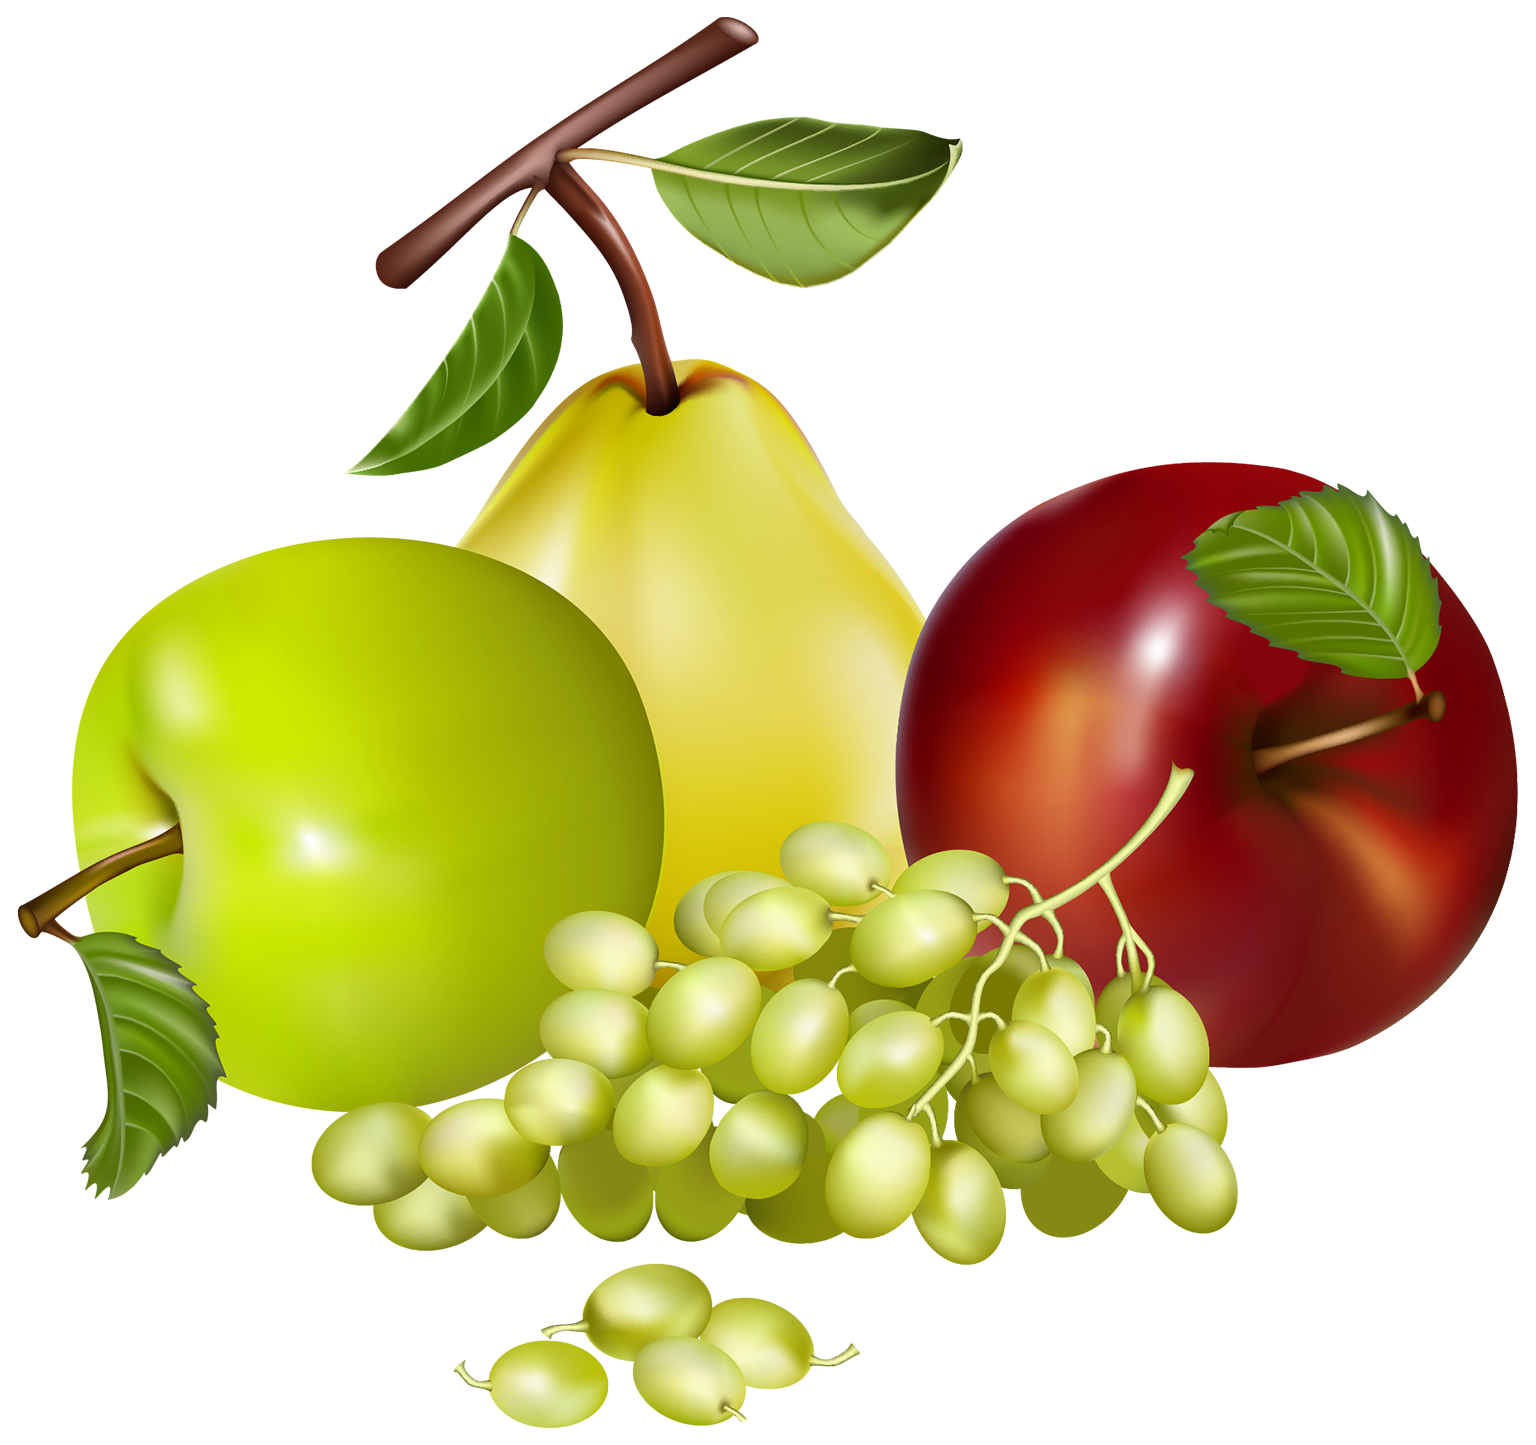 Fruits And Vegetables Animated Clip Art Library